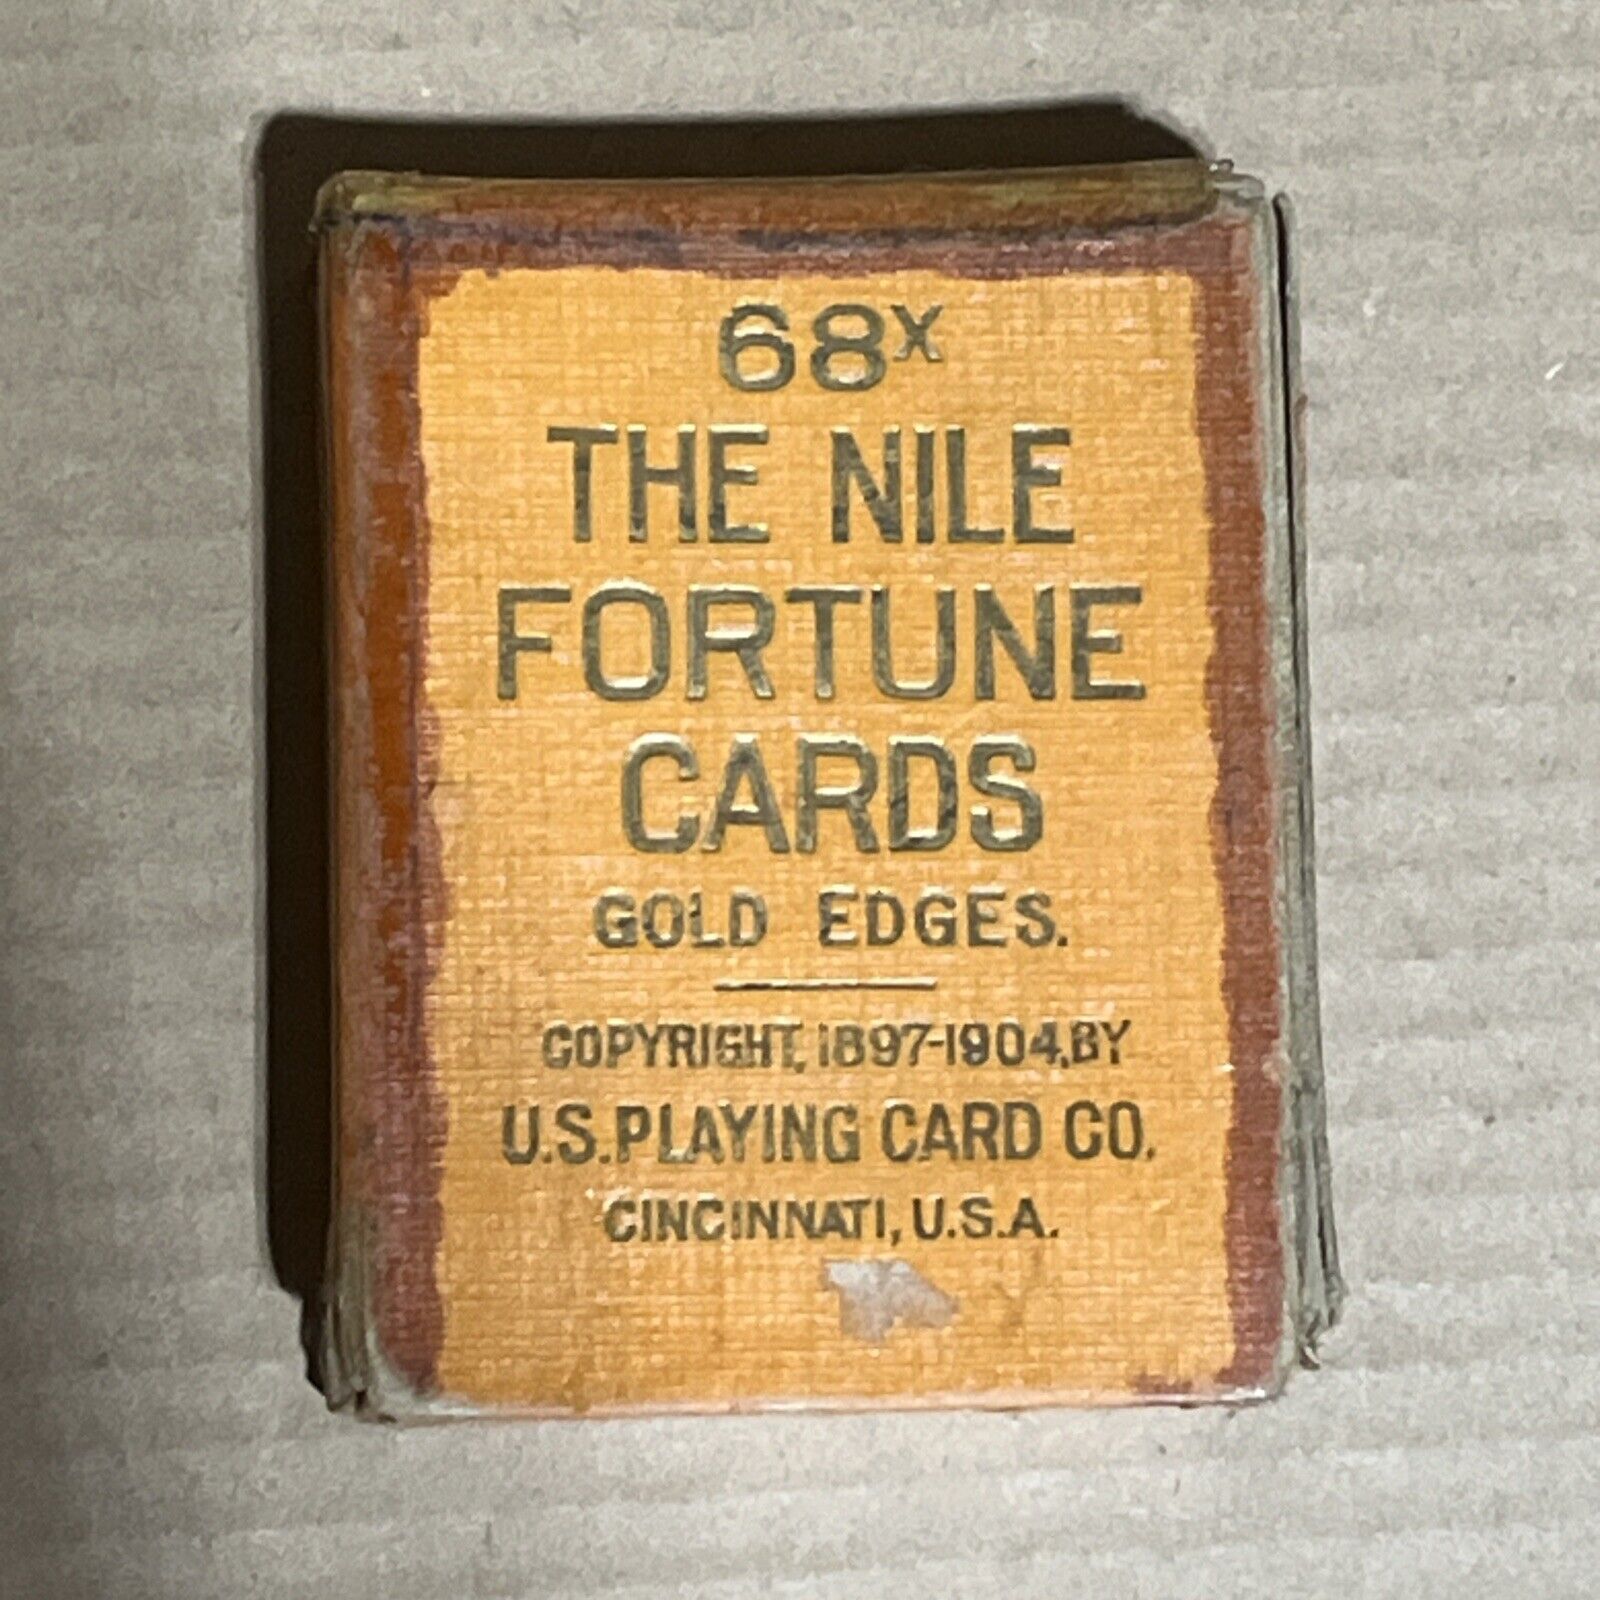 Vintage Orange 1897 68x The Nile Fortune Playing Cards Gold Edges Cincinnati OH